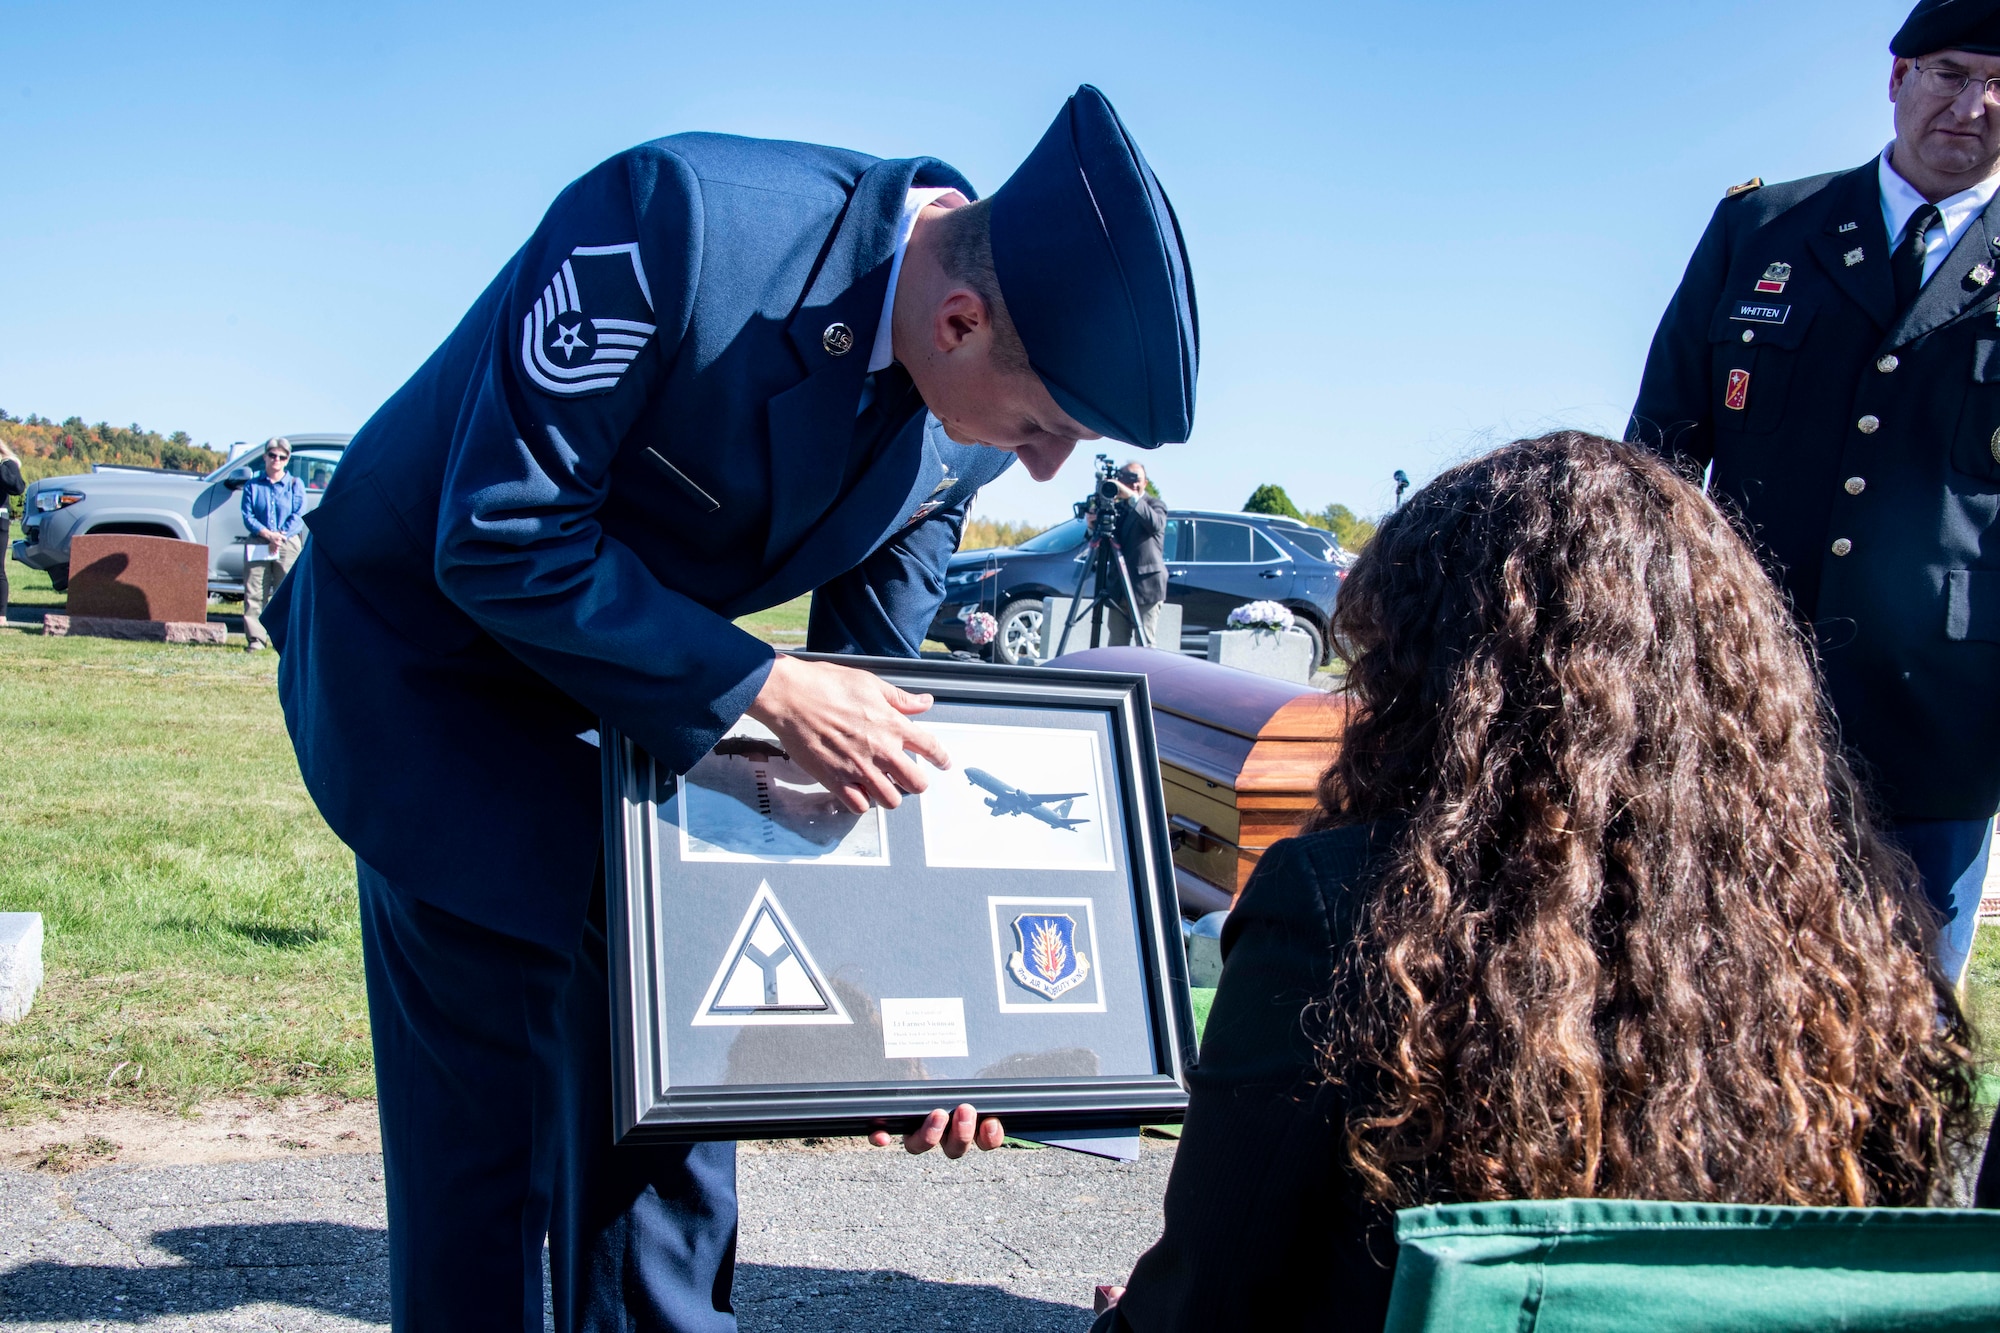 U.S. Air Force Master Sgt. Brad Edwards, 58th Airlift Squadron loadmaster, presents a plaque from the 97th Air Mobility Wing (AMW) to the family of U.S. Army Air Forces 2nd Lt. Earnest Vienneau, 97th Bombardment Group, during Vienneau’s funeral at Millinocket, Maine, Oct. 9, 2021. The plaque showcased the aircraft that Vienneau flew and the aircraft that was flown over the funeral by members of the 97th AMW. (U.S. Air Force photo by Staff Sgt. Cody Dowell)